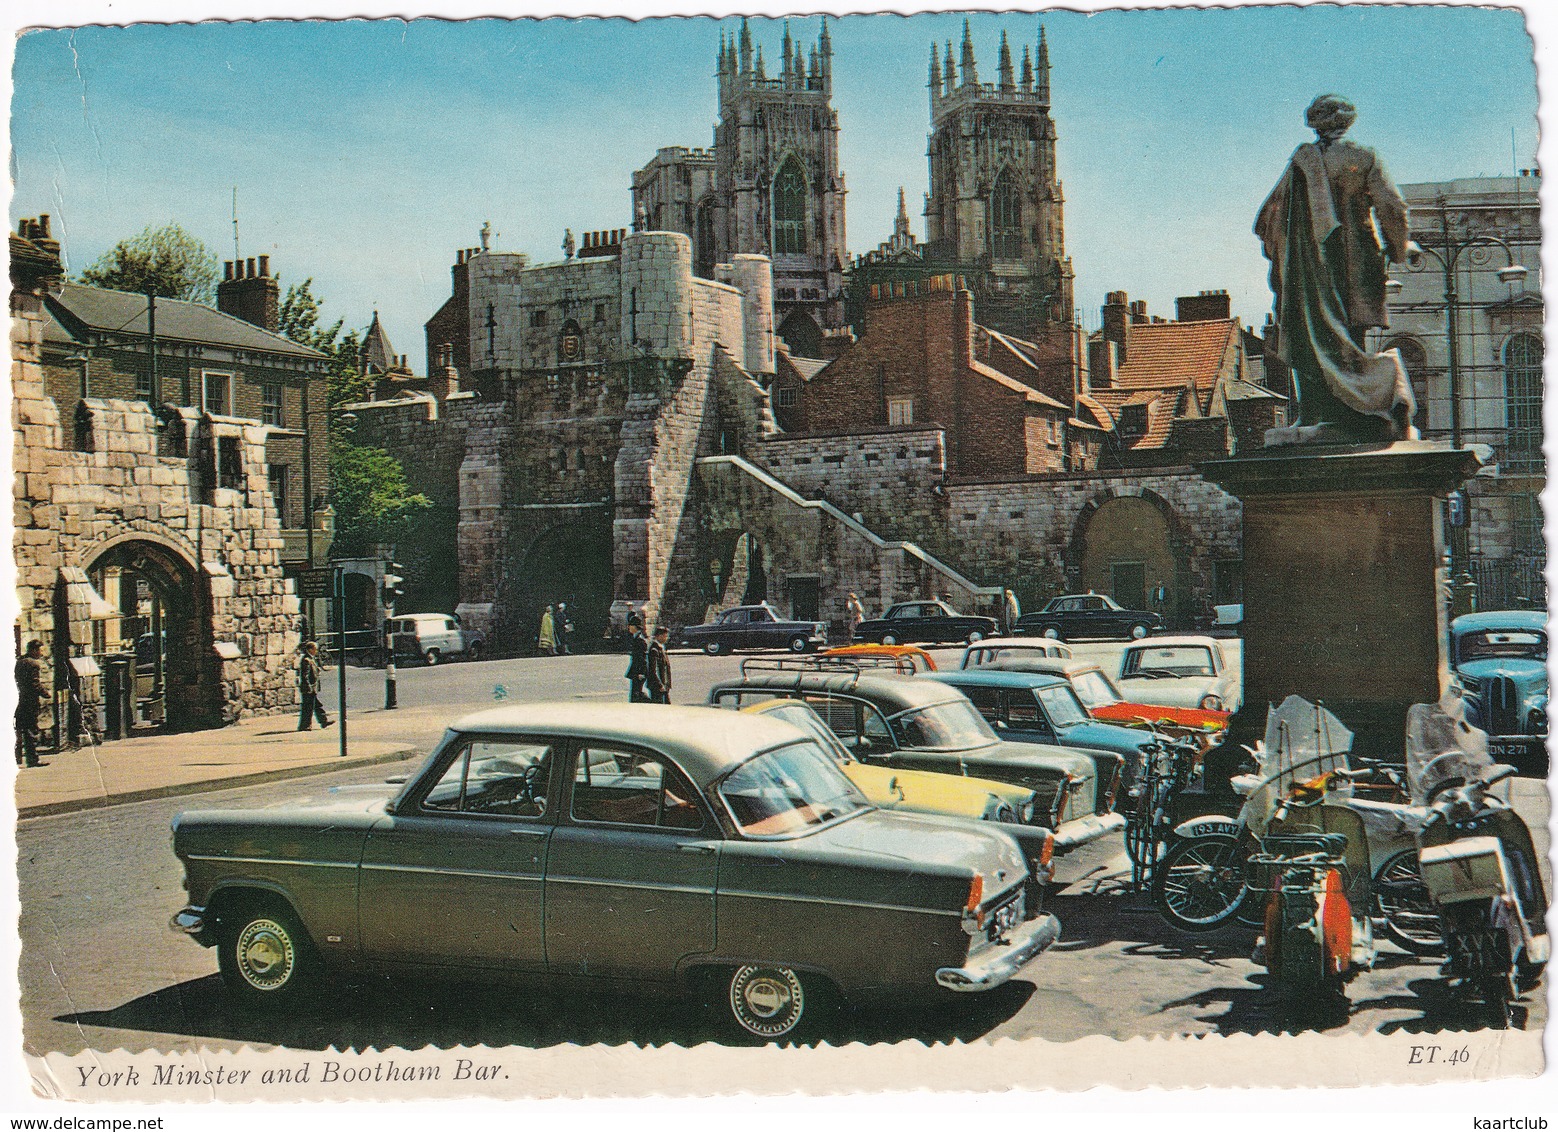 York: FORD CONSUL MKII, SINGER GAZELLE III CONV., VAUXHALL VICTOR, MINI, FORD ANGLIA, SCOOTER, MOTORCYCLES - Toerisme